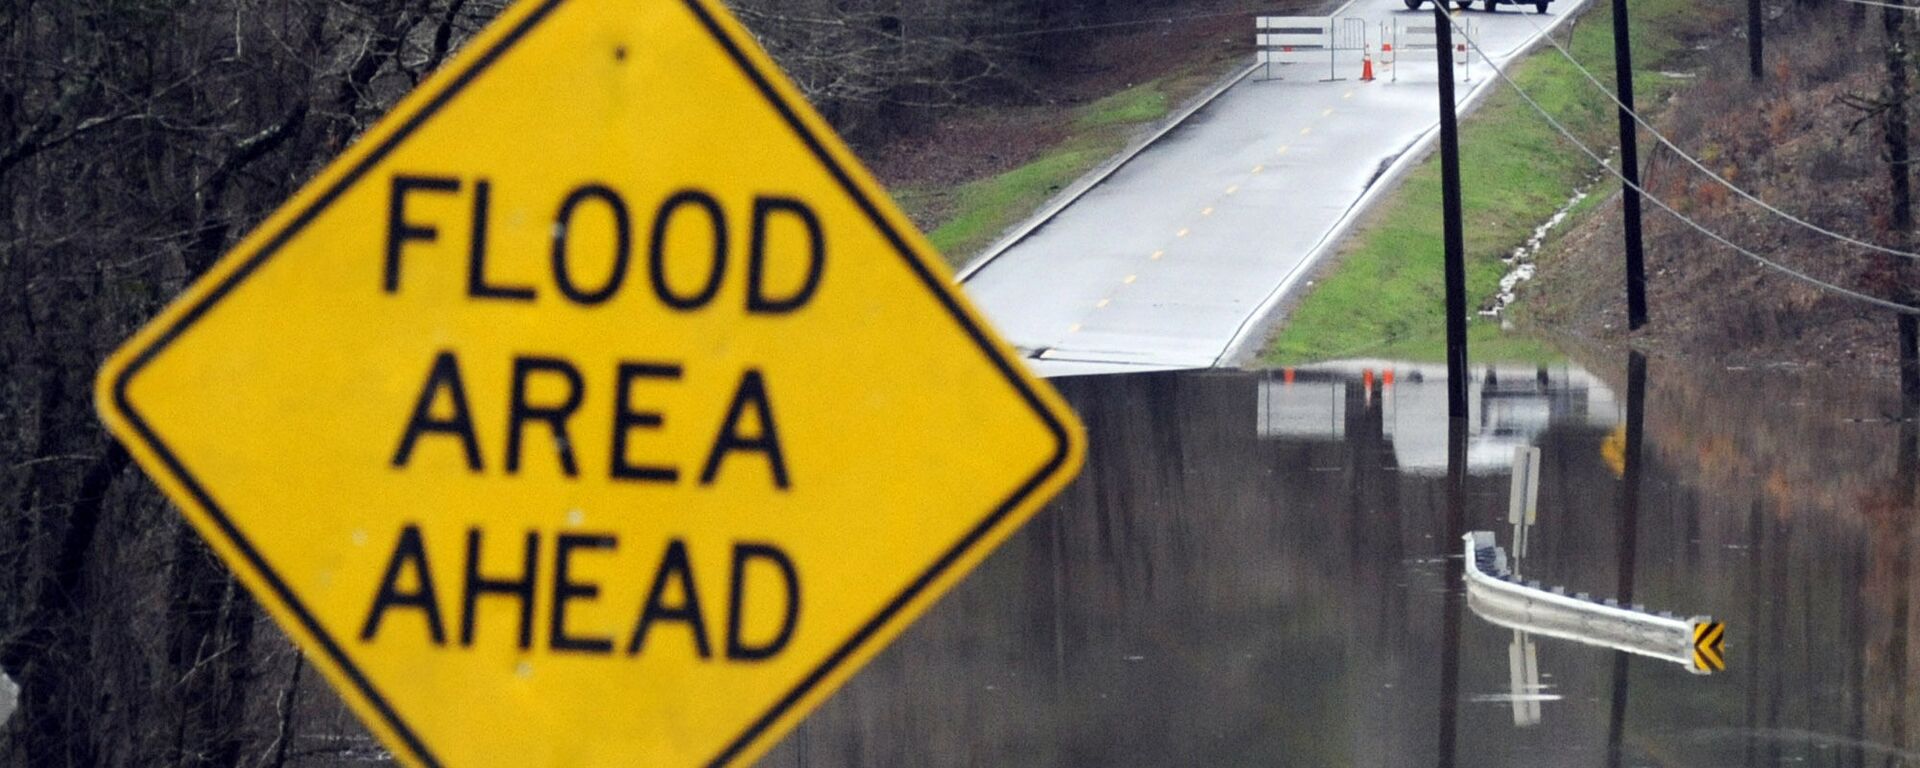 Vehicles turn around on a road blocked by floodwaters in Helena, Ala., on Tuesday, Feb. 11, 2020. The National Weather Service said flooding was expected from central Mississippi to north Georgia following downpours, and severe storms could follow the rain.  - Sputnik International, 1920, 29.07.2020